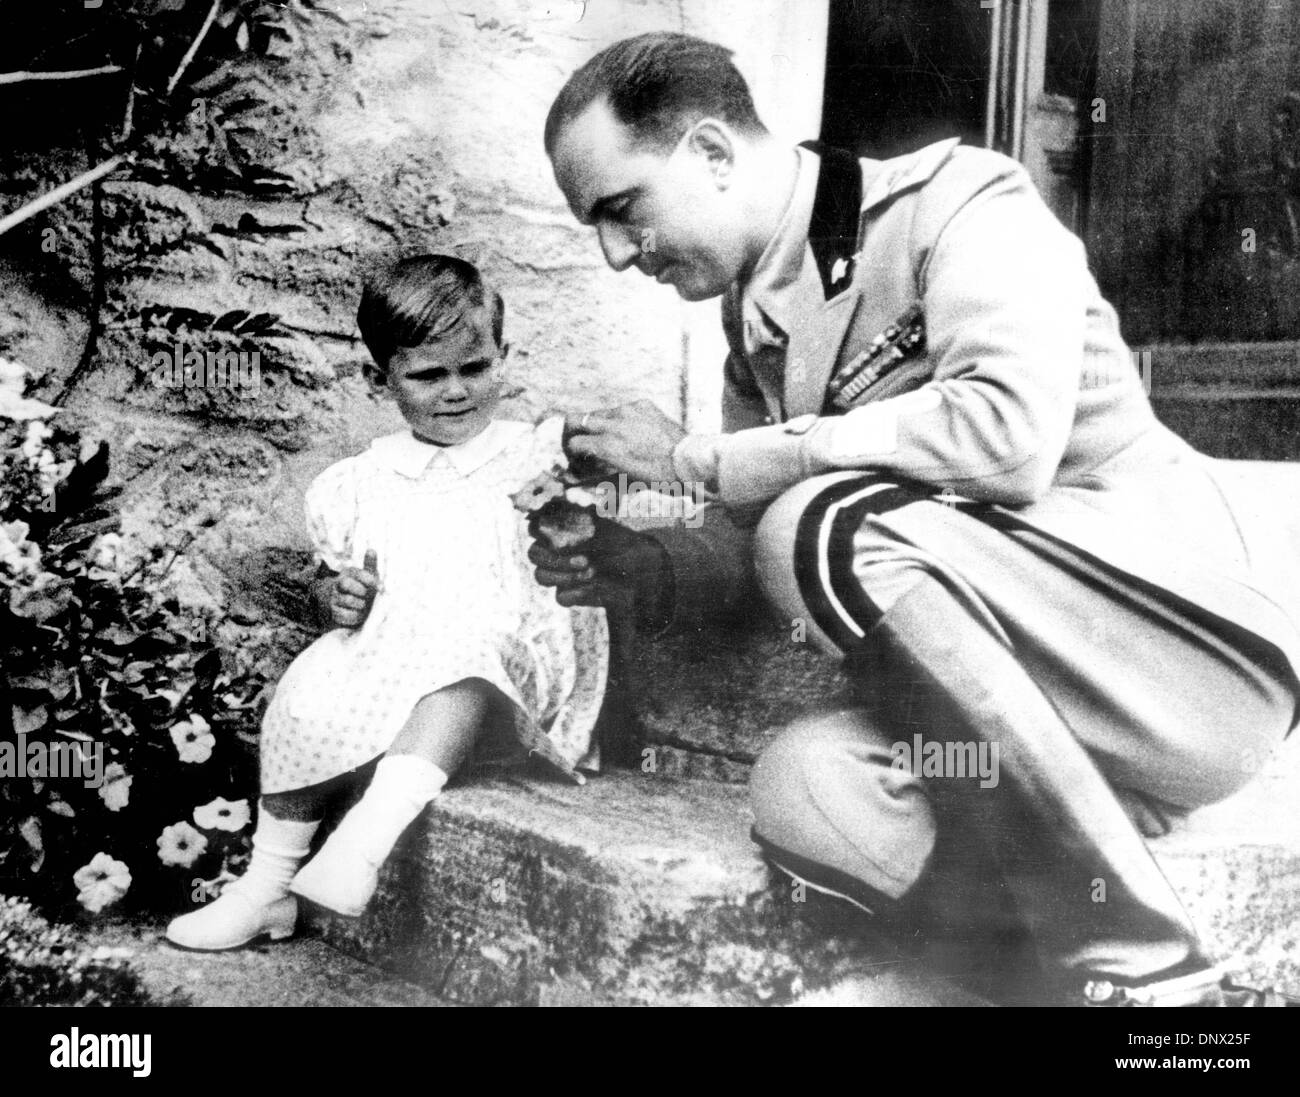 May 17, 1945  - Rome, Italy - UMBERTO II in uniform with his oldest daughter Maria Pia. Occasionally anglicized as Humbert II, (September 15, 1904, Racconigi, province of Cuneo - March 18, 1983, Geneva, Switzerland), the last King of Italy, nicknamed the King of May (Italian: Re di Maggio), was born the Prince of Piedmont. He was the third child of King Victor Emmanuel III of Italy Stock Photo